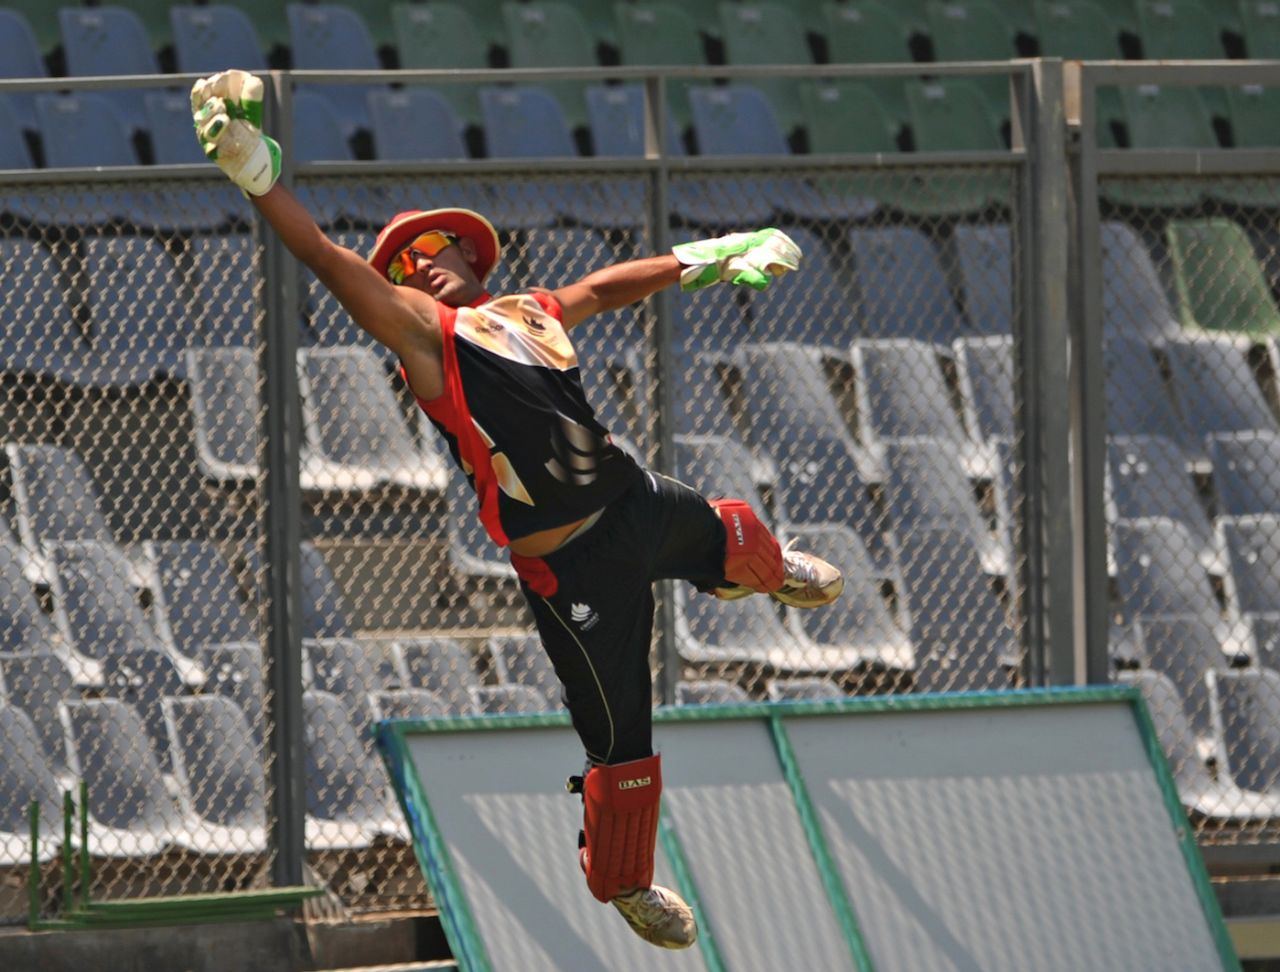 Canada's wicketkeeper Hamza Tariq in action during practice at the 2011 World Cup, Mumbai, March 11, 2011